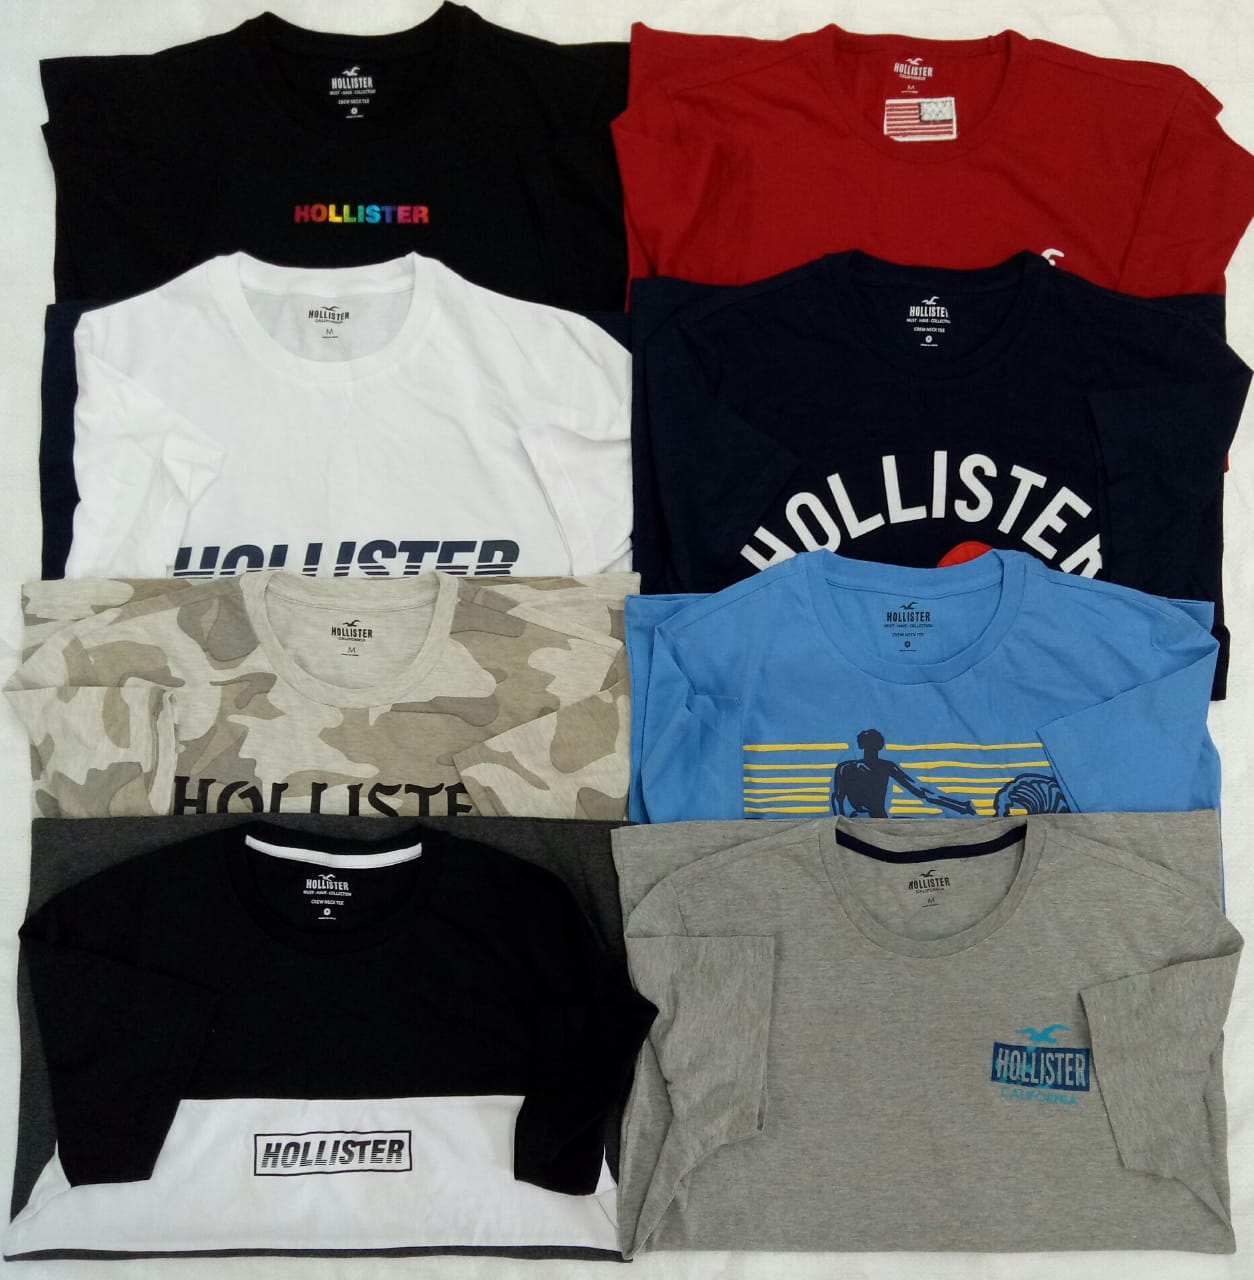 hollister t shirts online shopping india